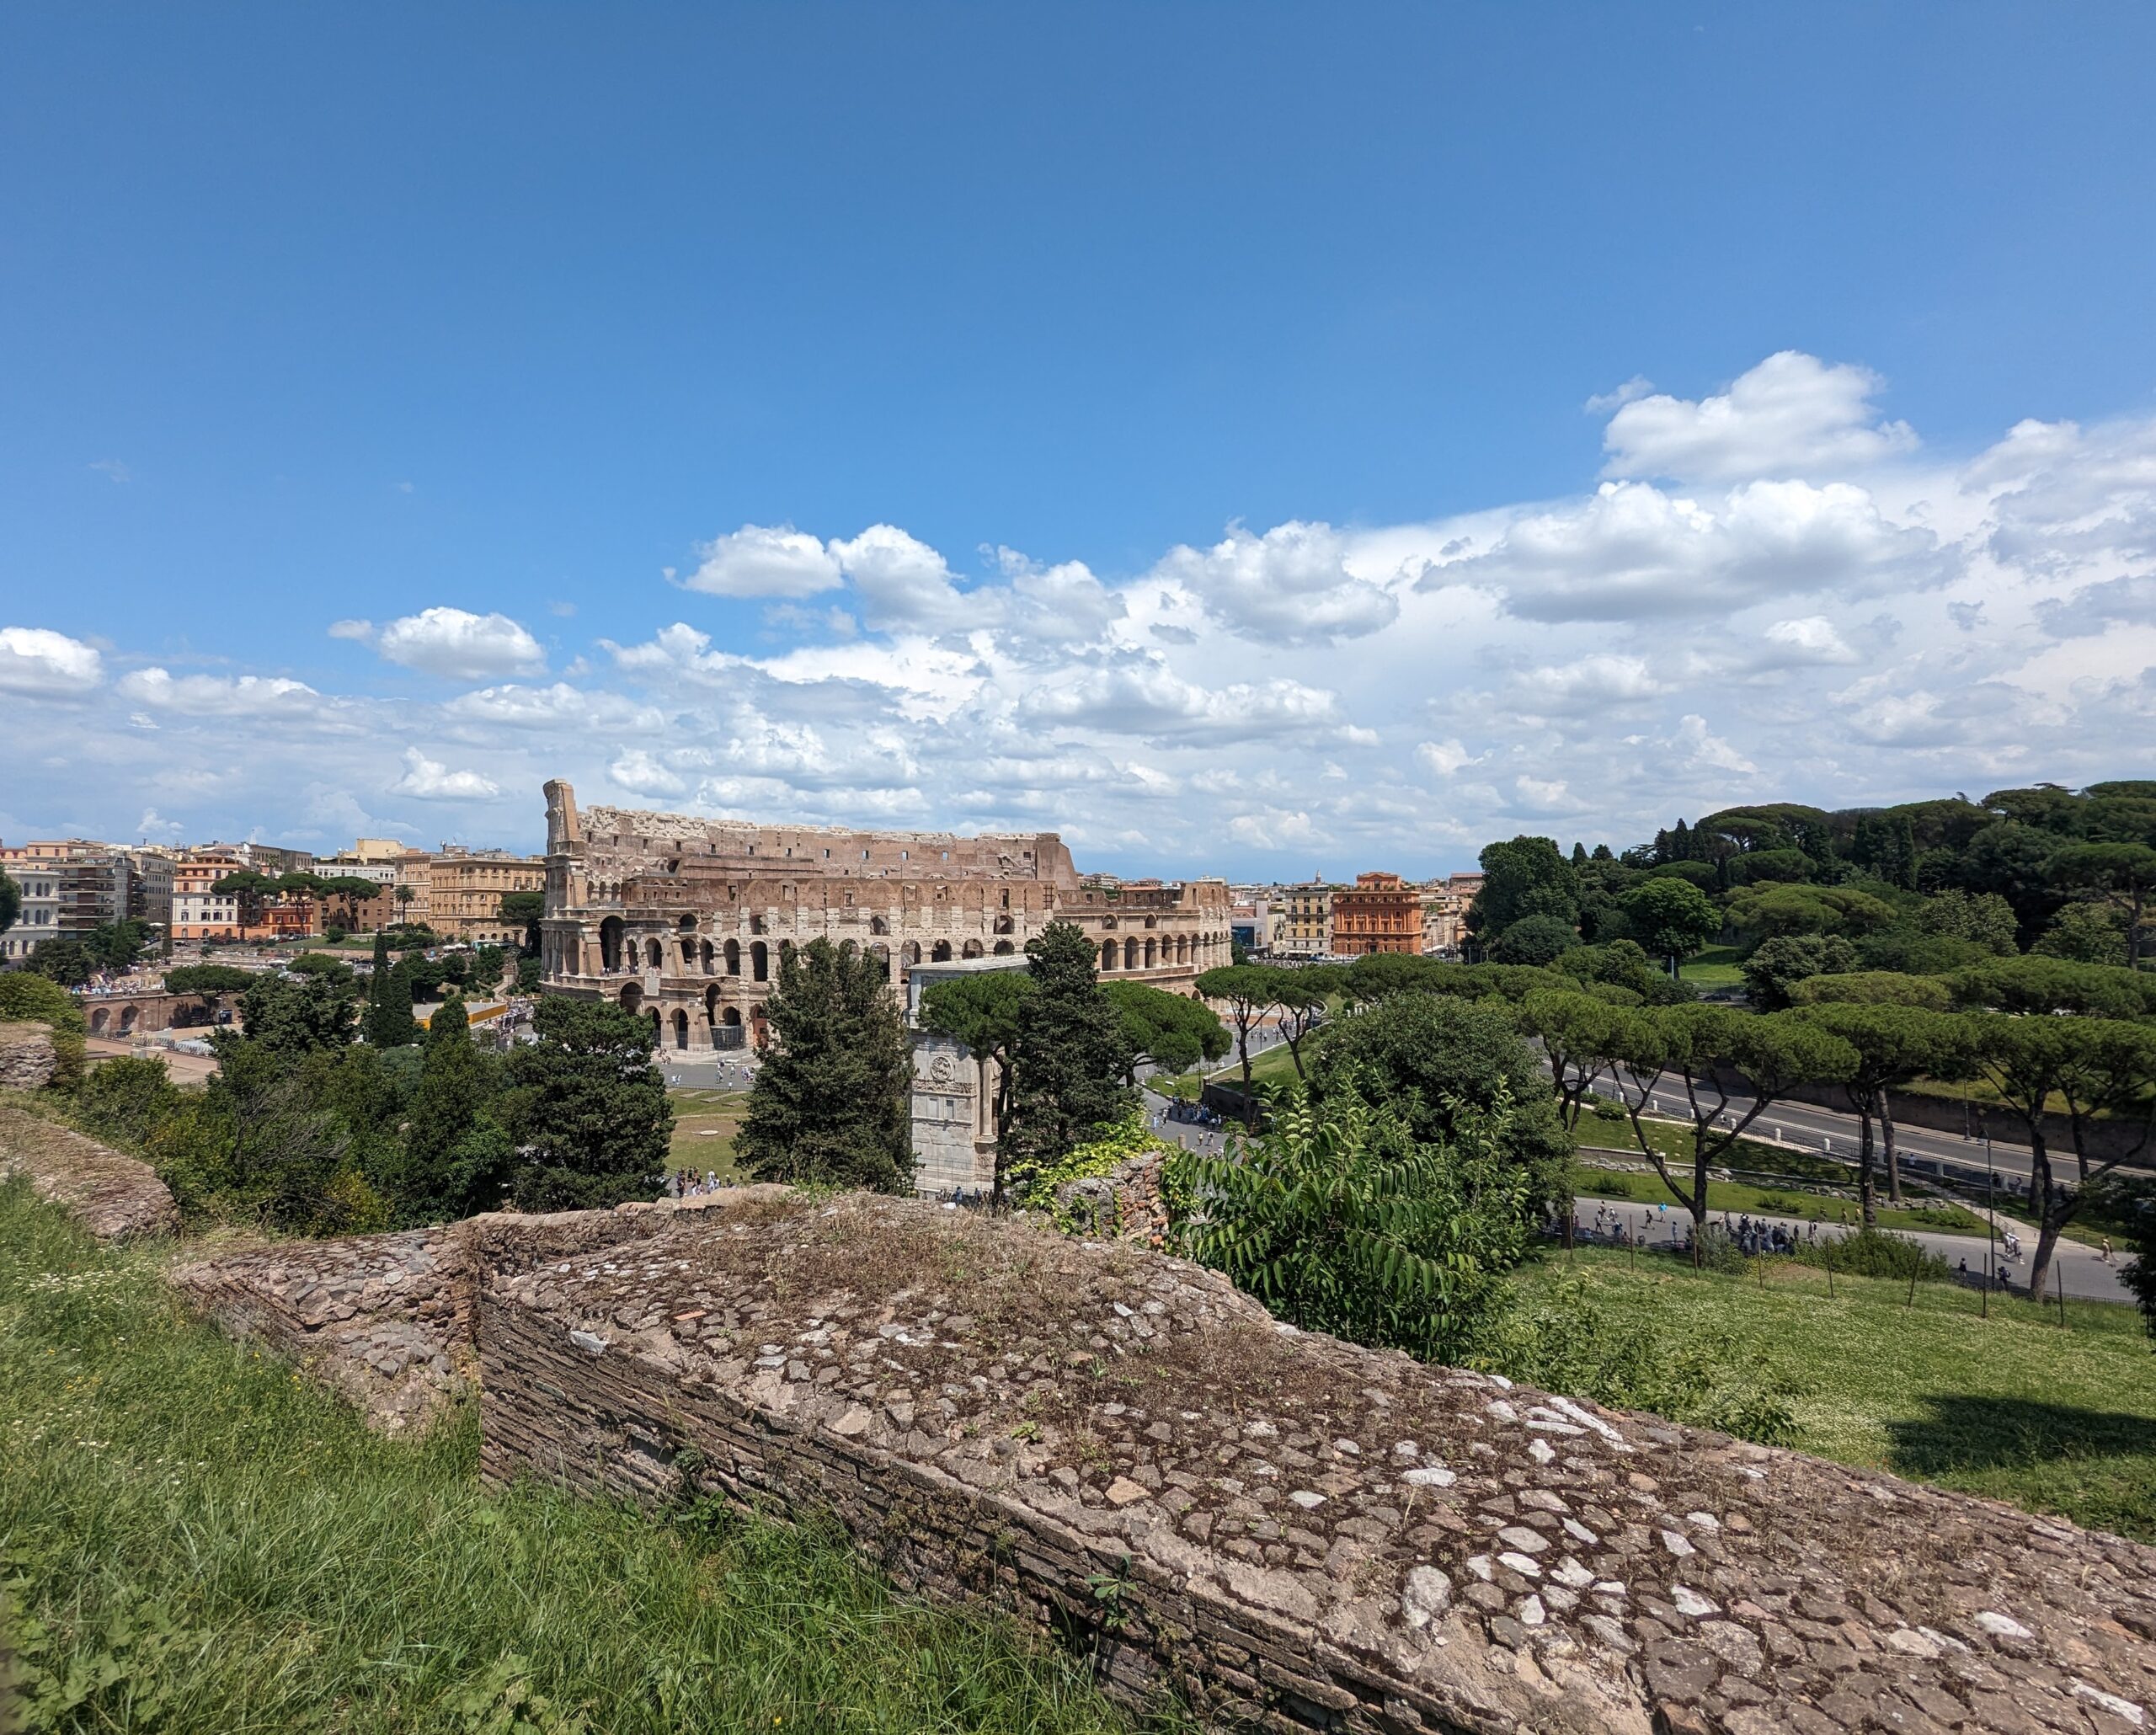 The Colosseum from a distance